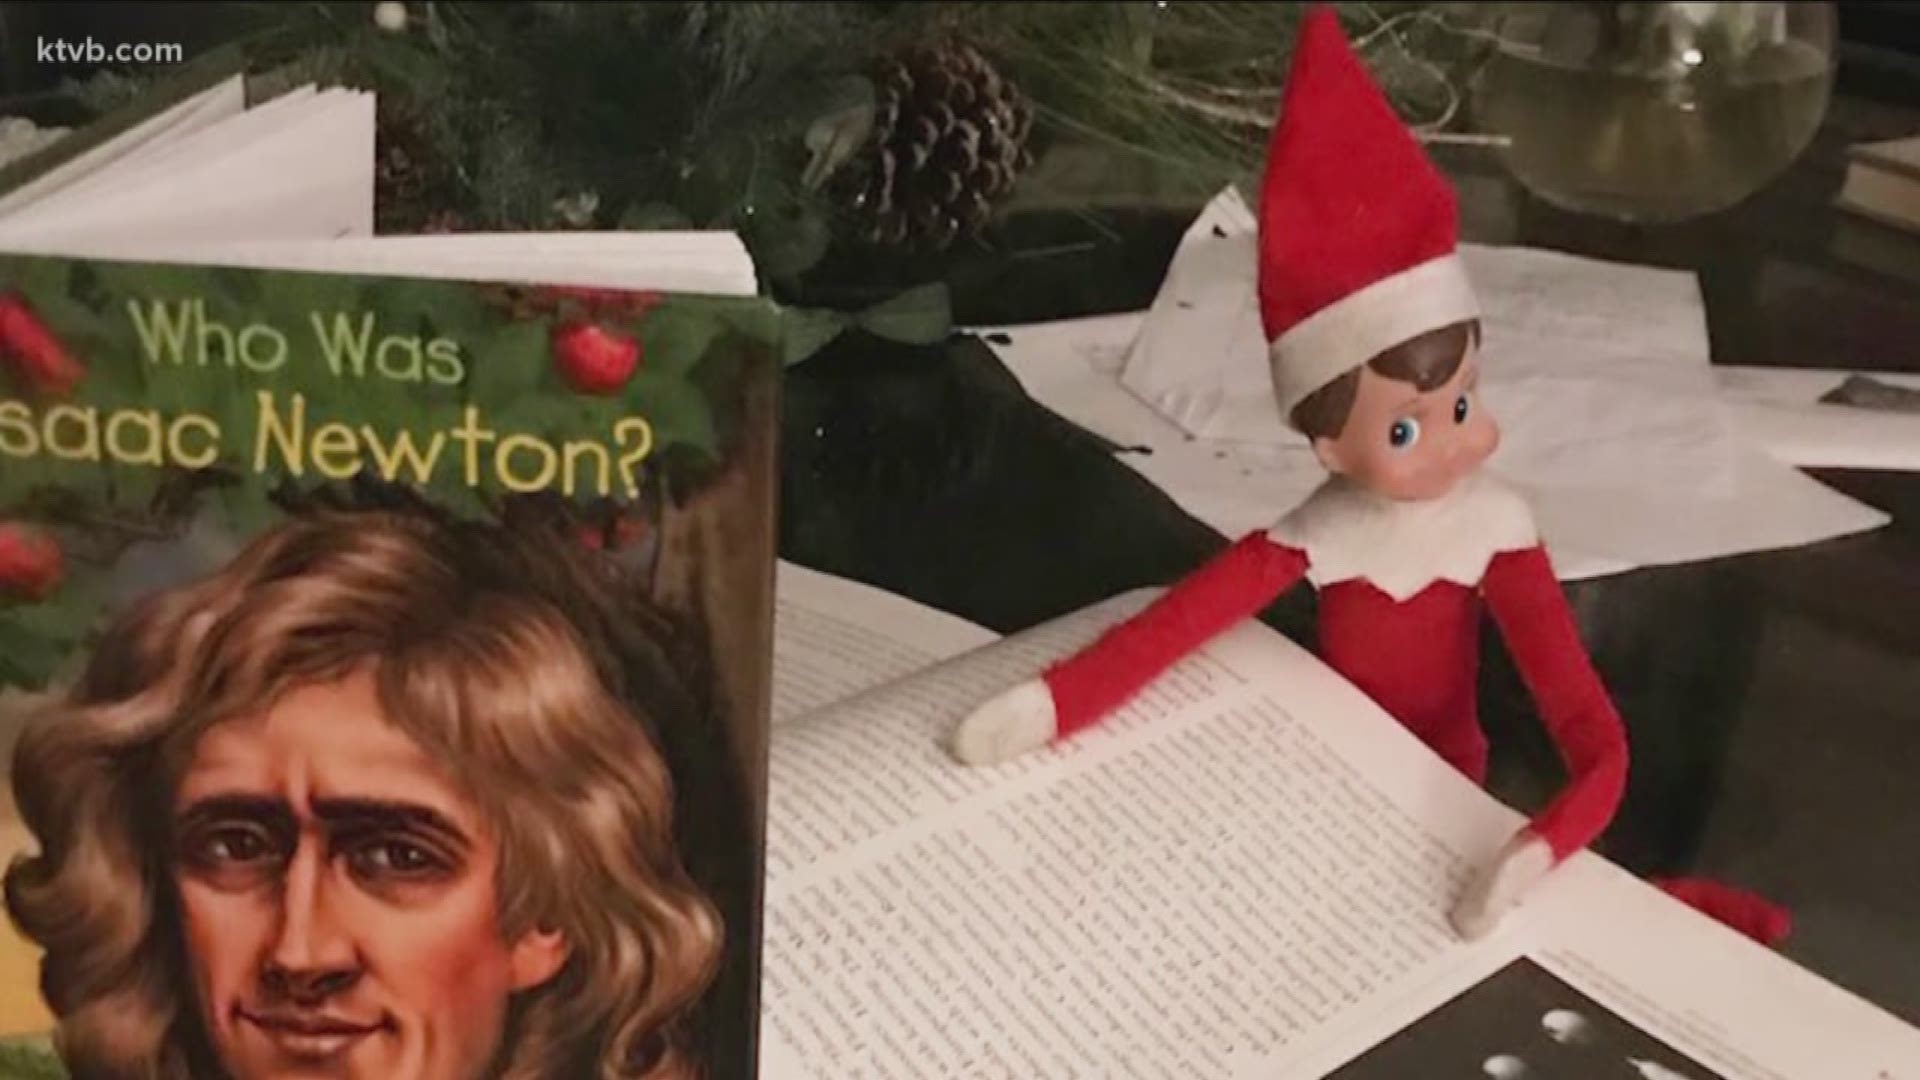 The elf on the shelf leads quite an active life.